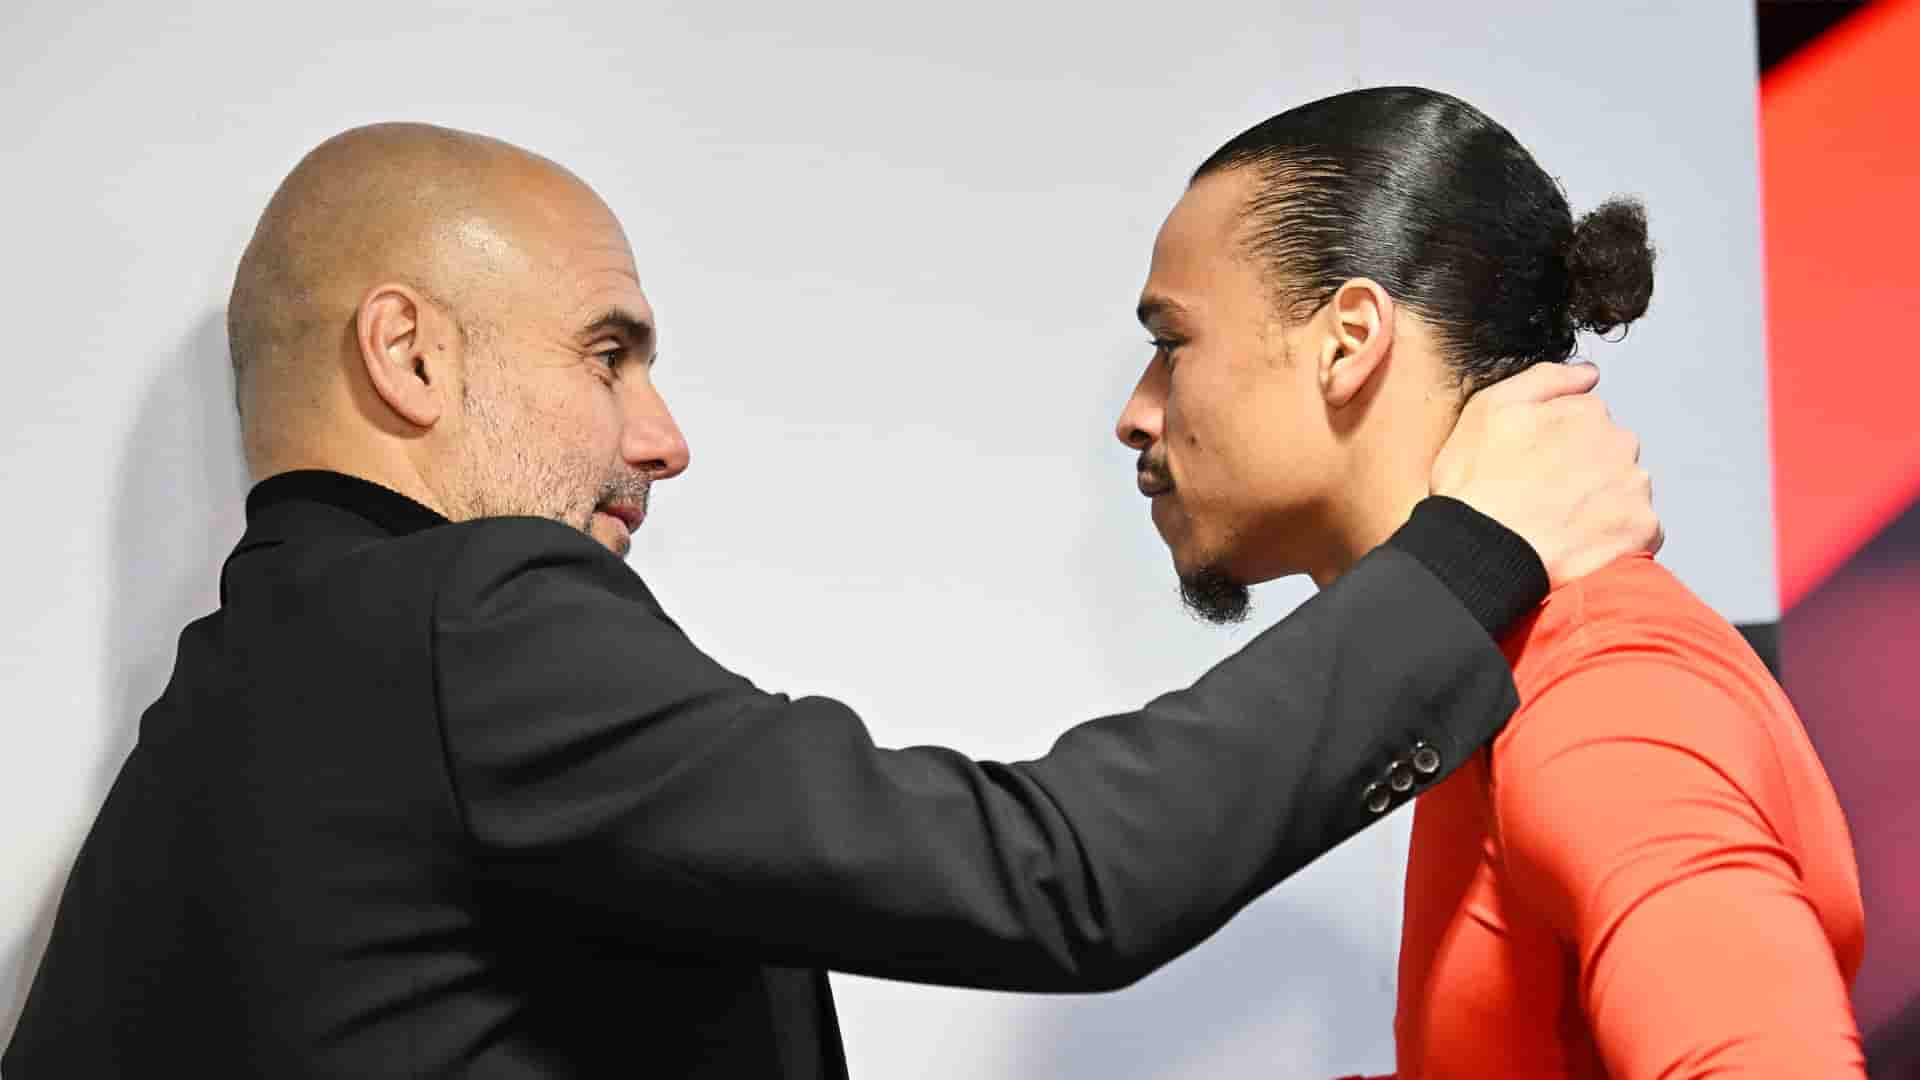 Leroy Sane Consoled by Pep Guardiola in Touching Moment 